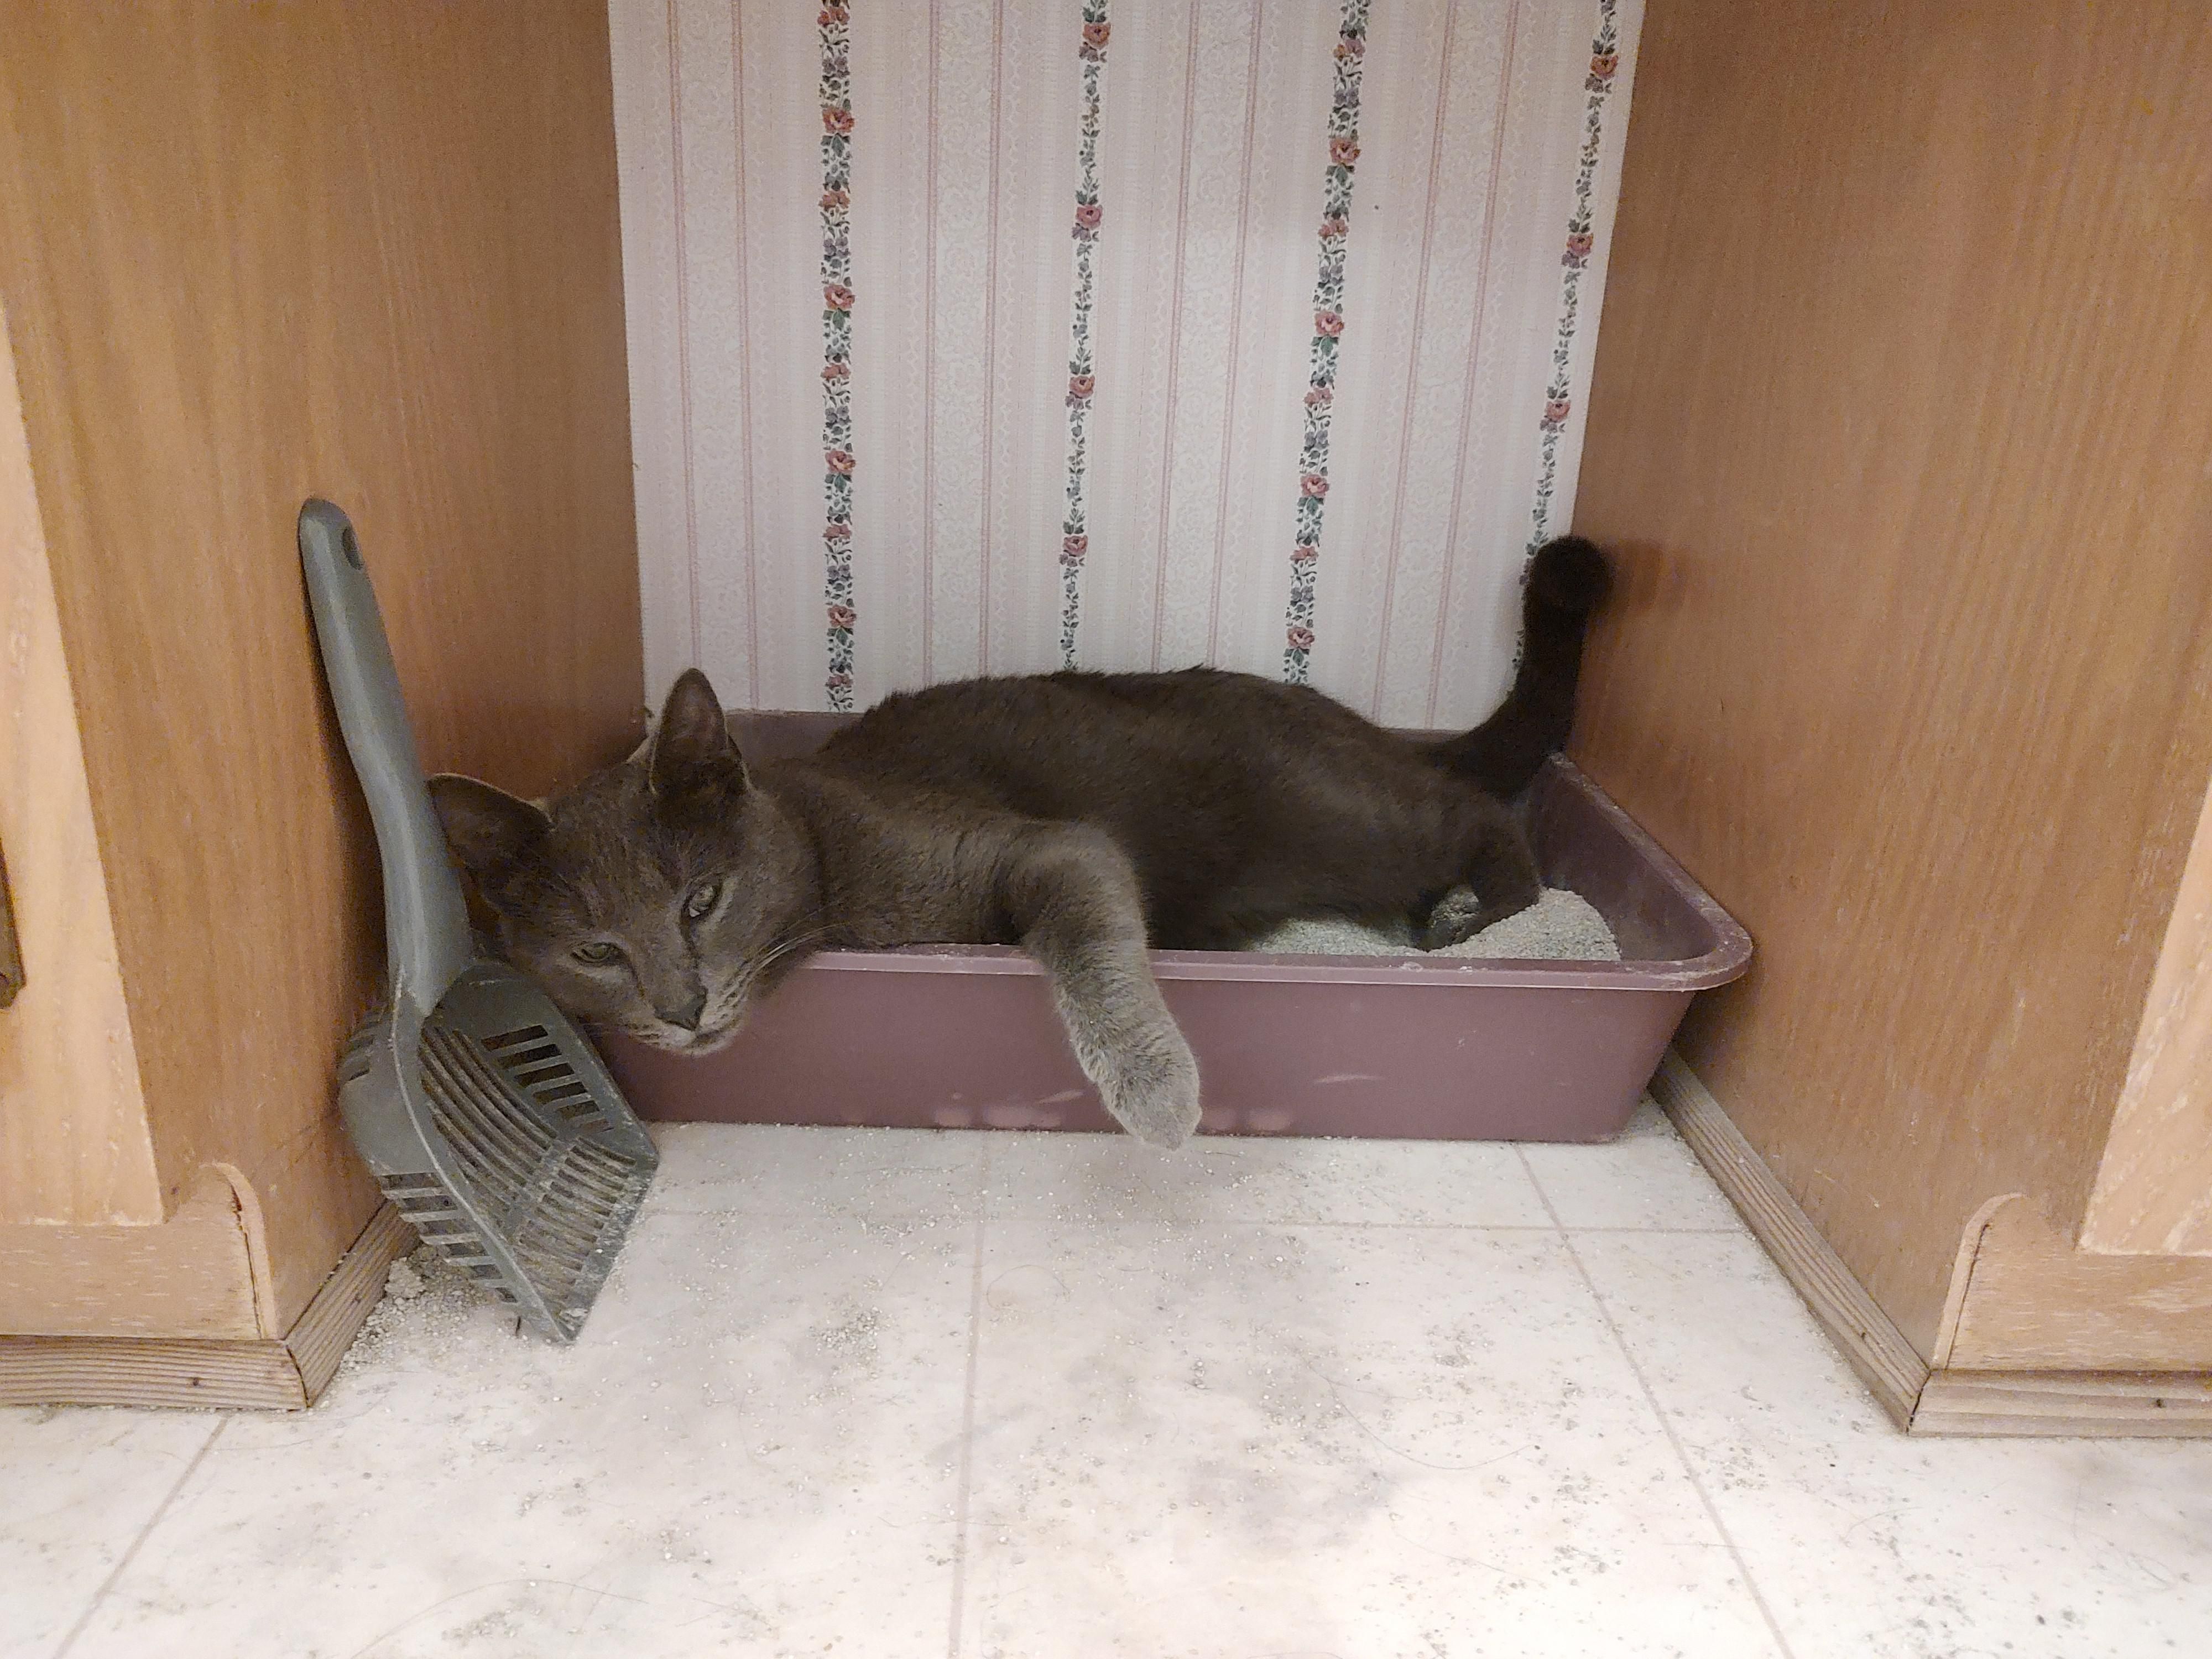 i don't think the cat understands the litter box